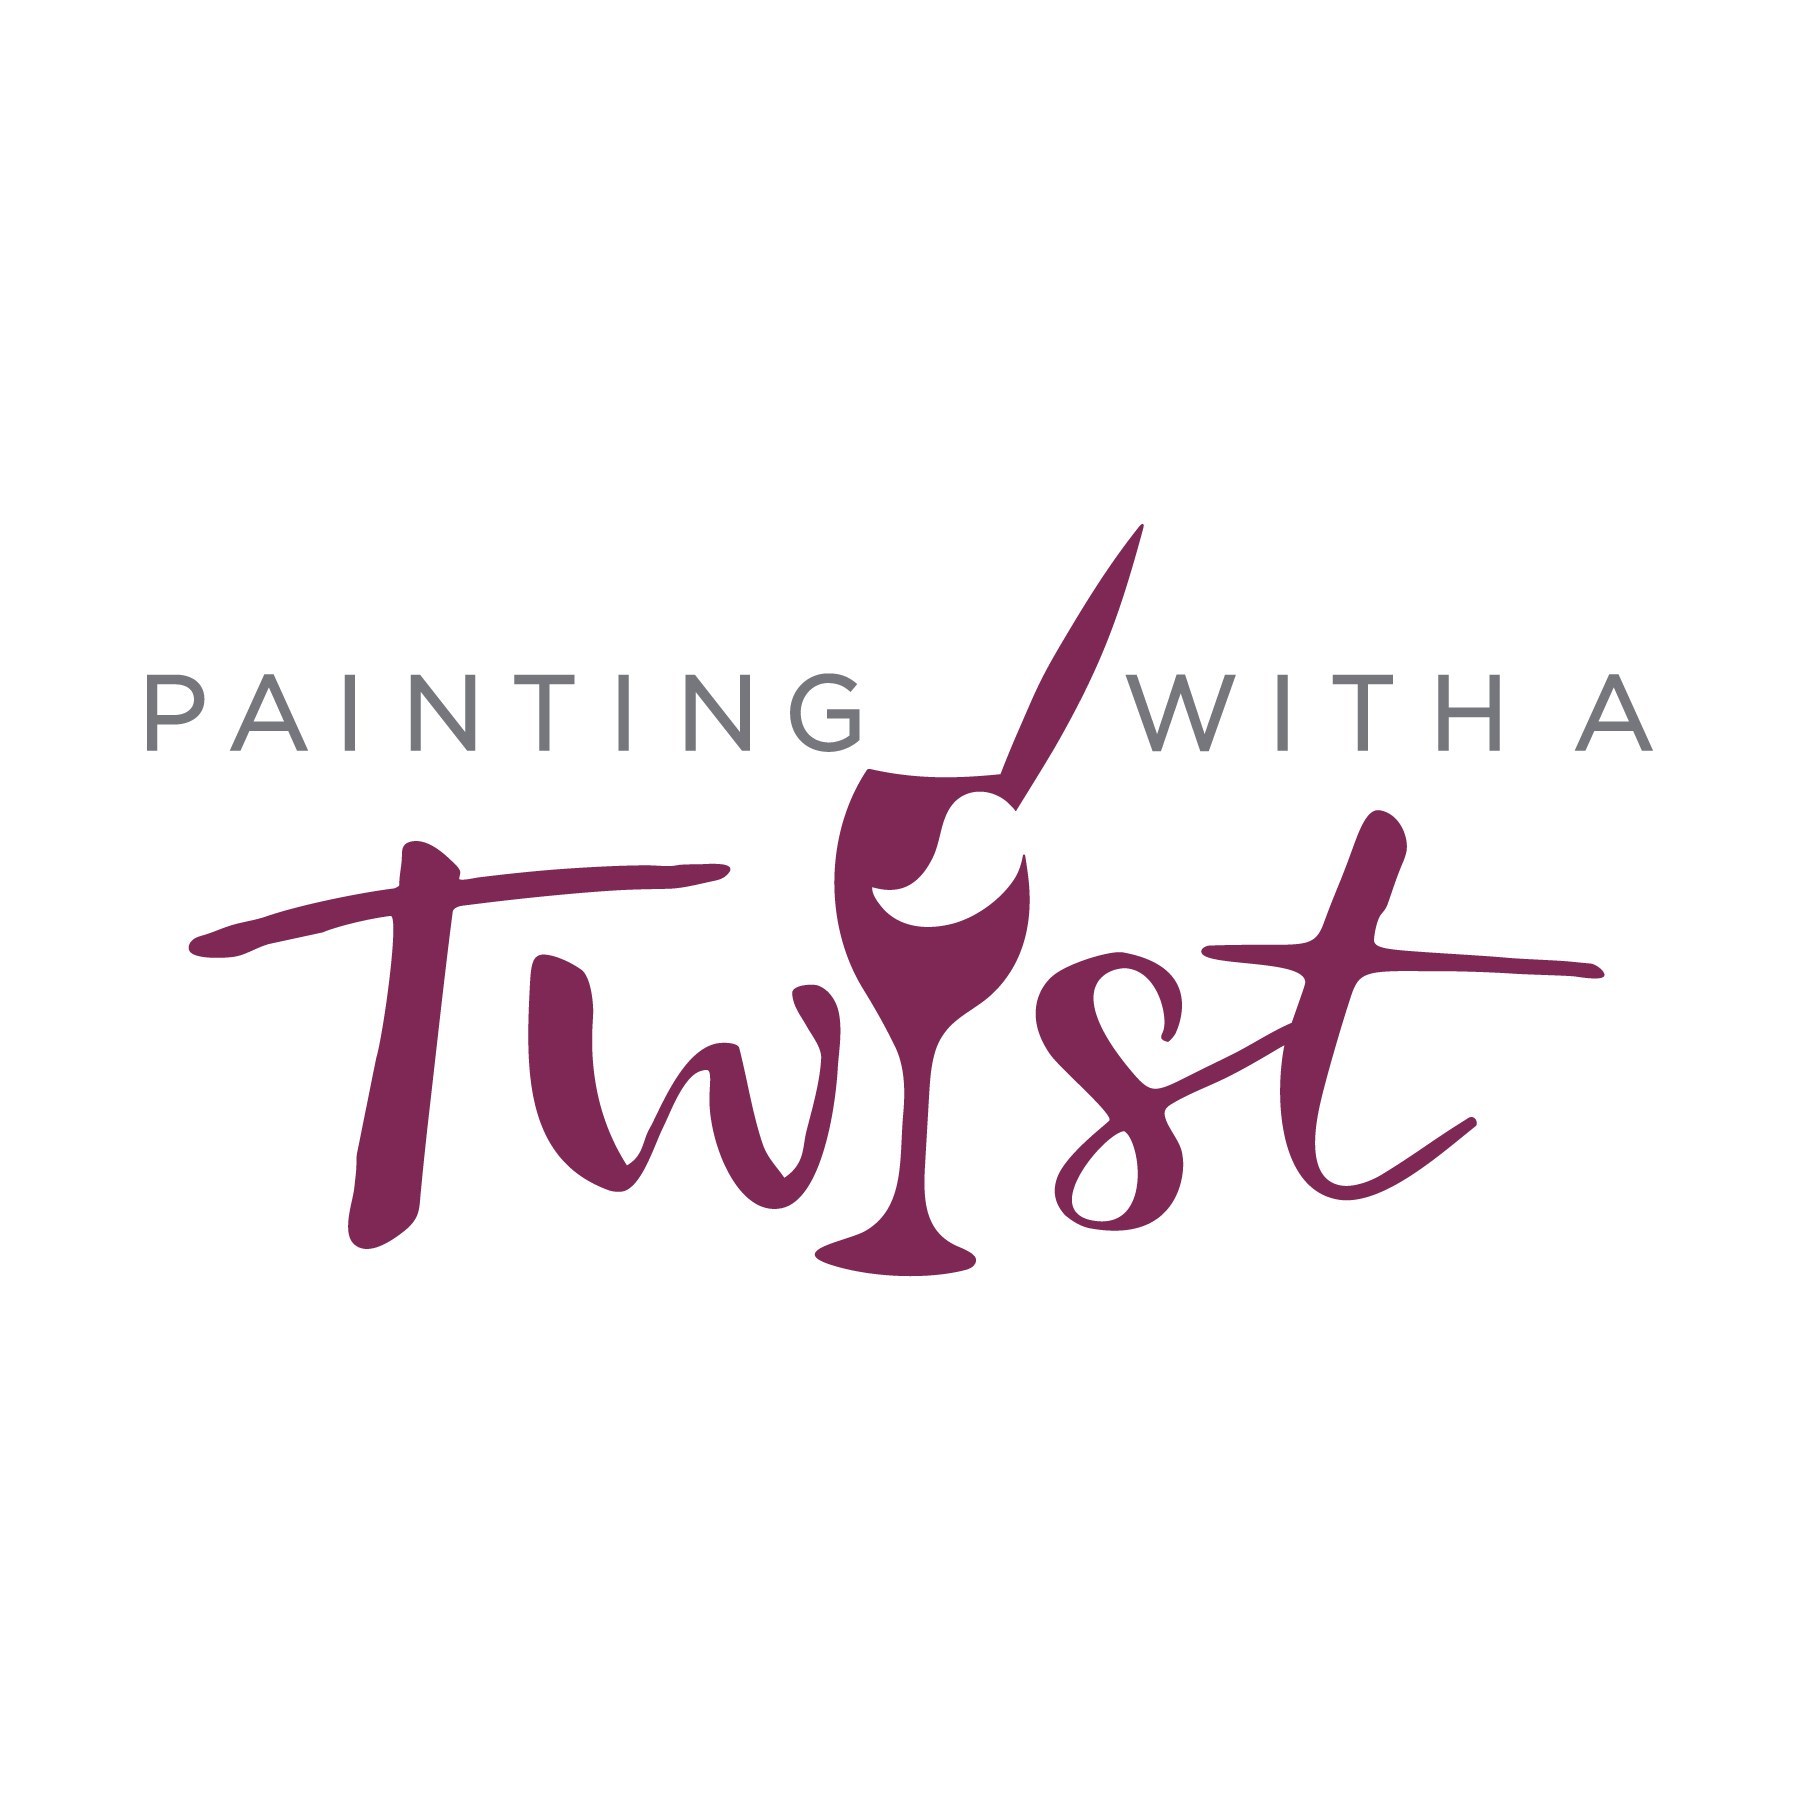 Painting with a Twist Cofounder Cathy Deano Lands on Forbes' 50 Over